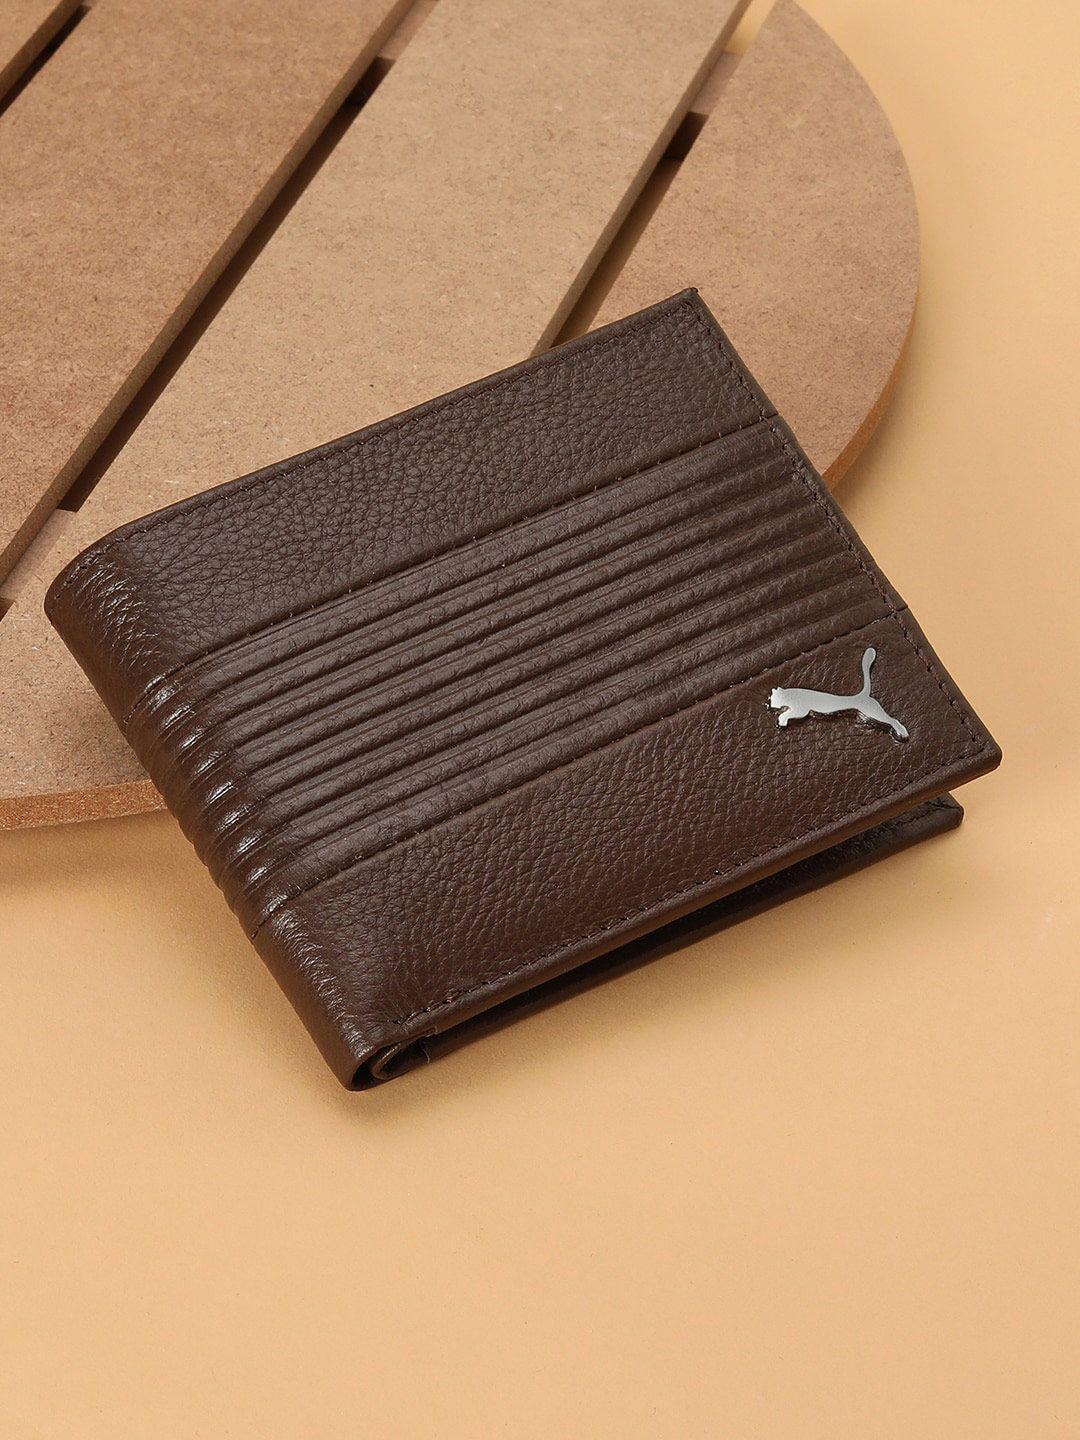 puma textured leather cruise wallets